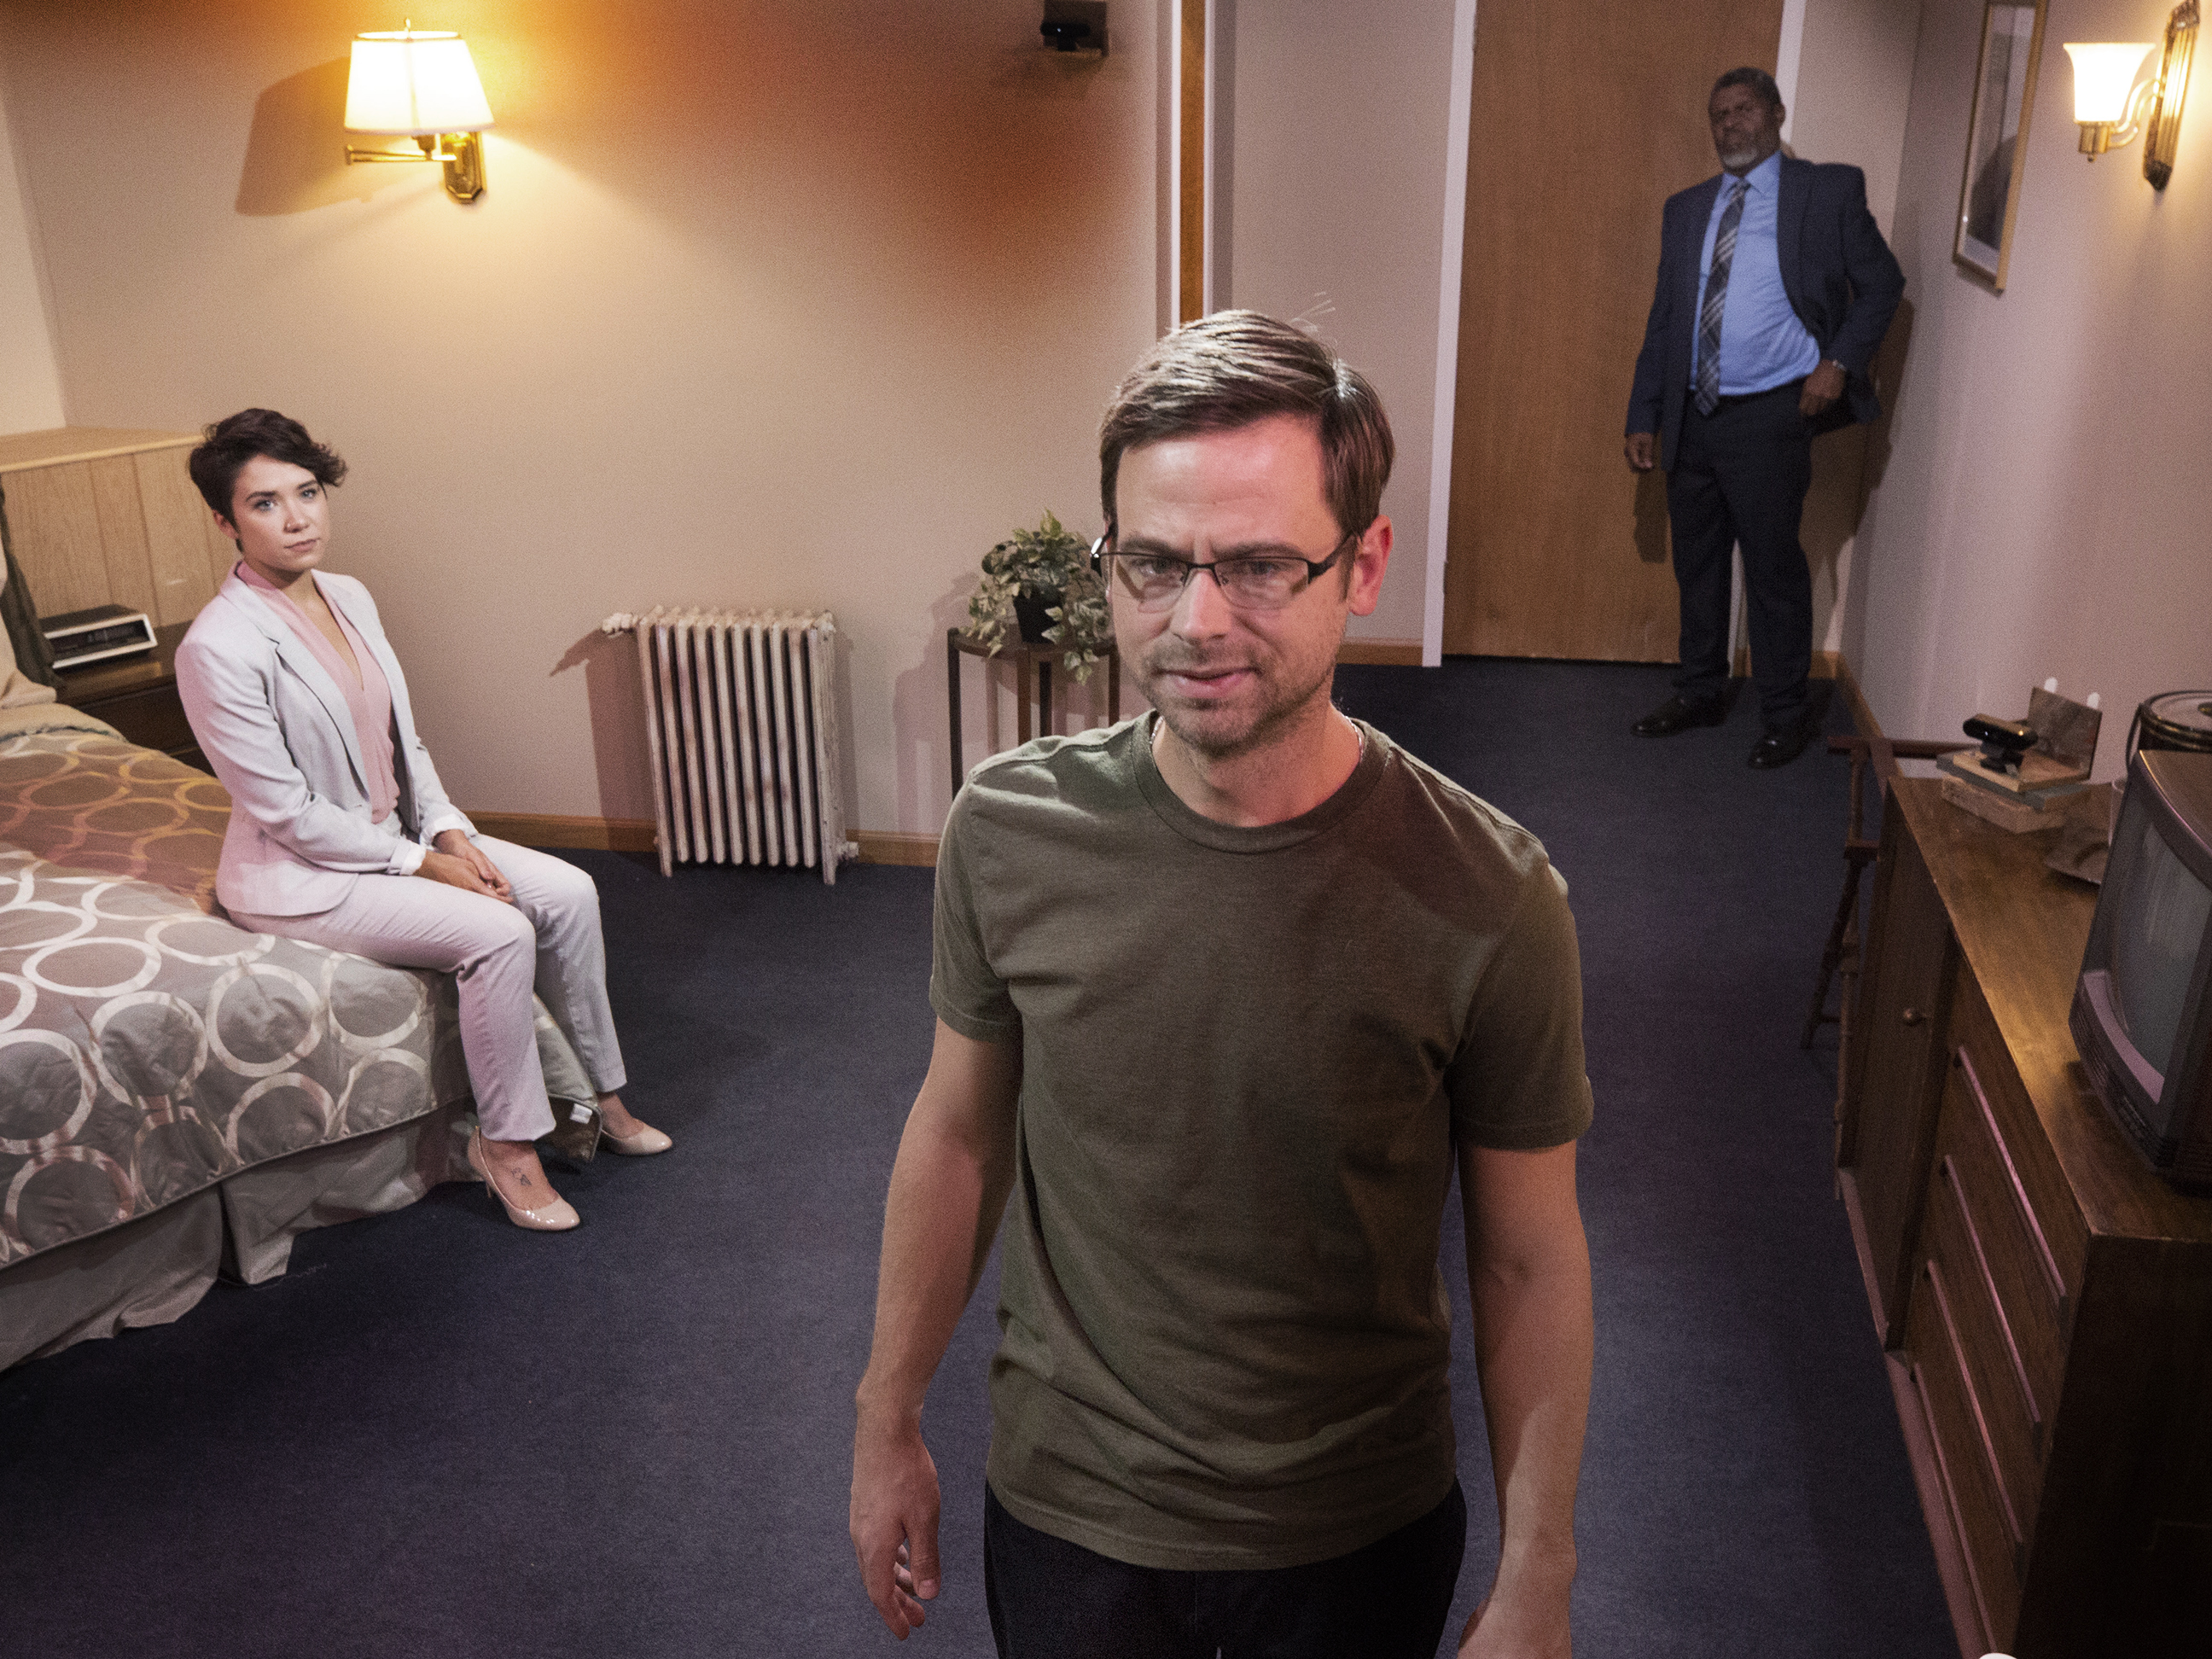 Three people in a hotel room; a woman sitting on the bed, a man standing in the foreground, and a man standing at the door.